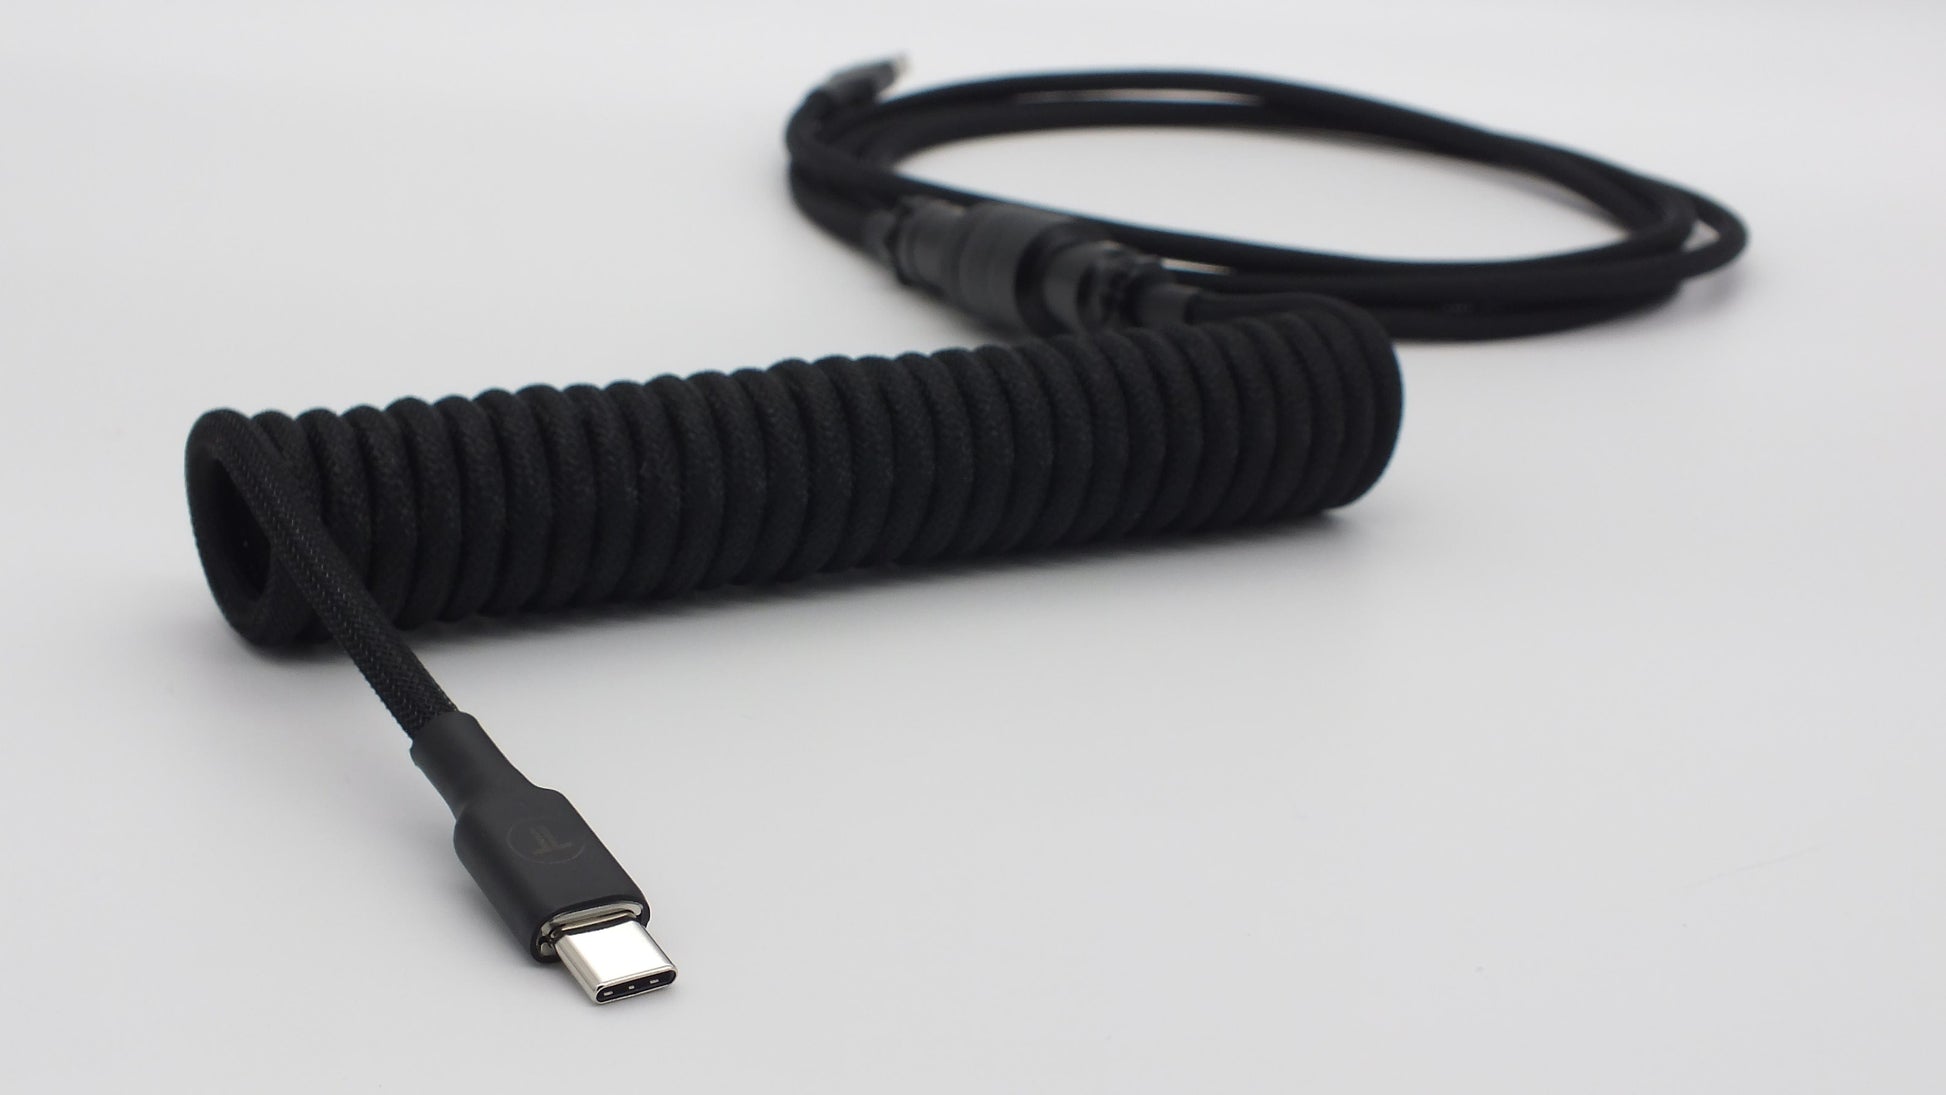 Teleport Coiled Cable mit Aviator Connector USB-A auf USB-C – The Teleport